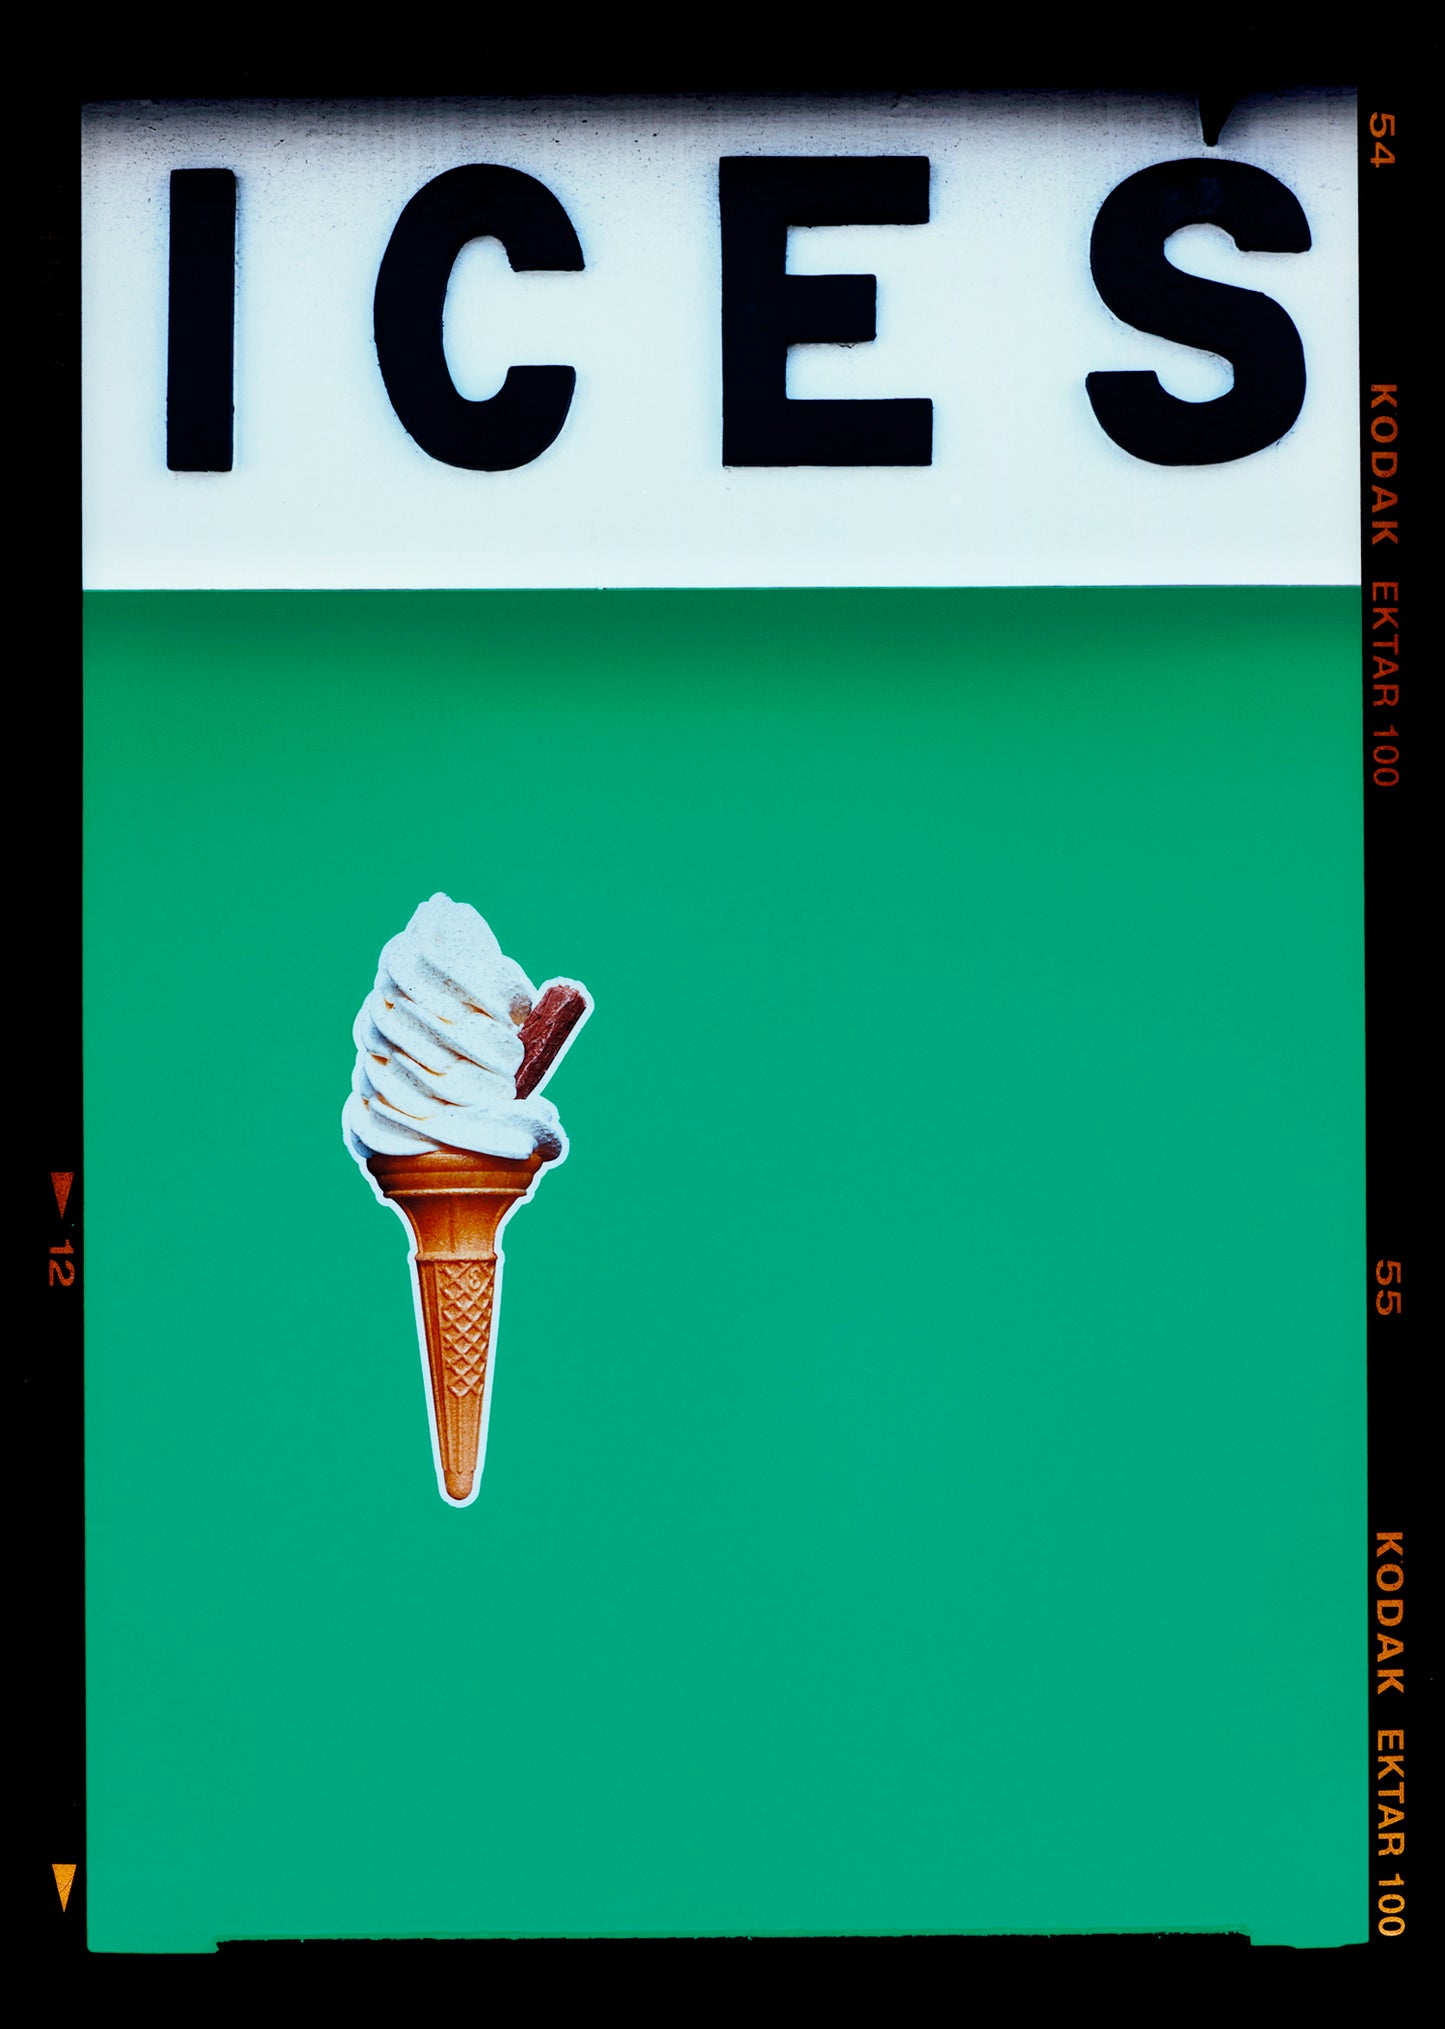 Ices (Viridian) by Richard Heeps